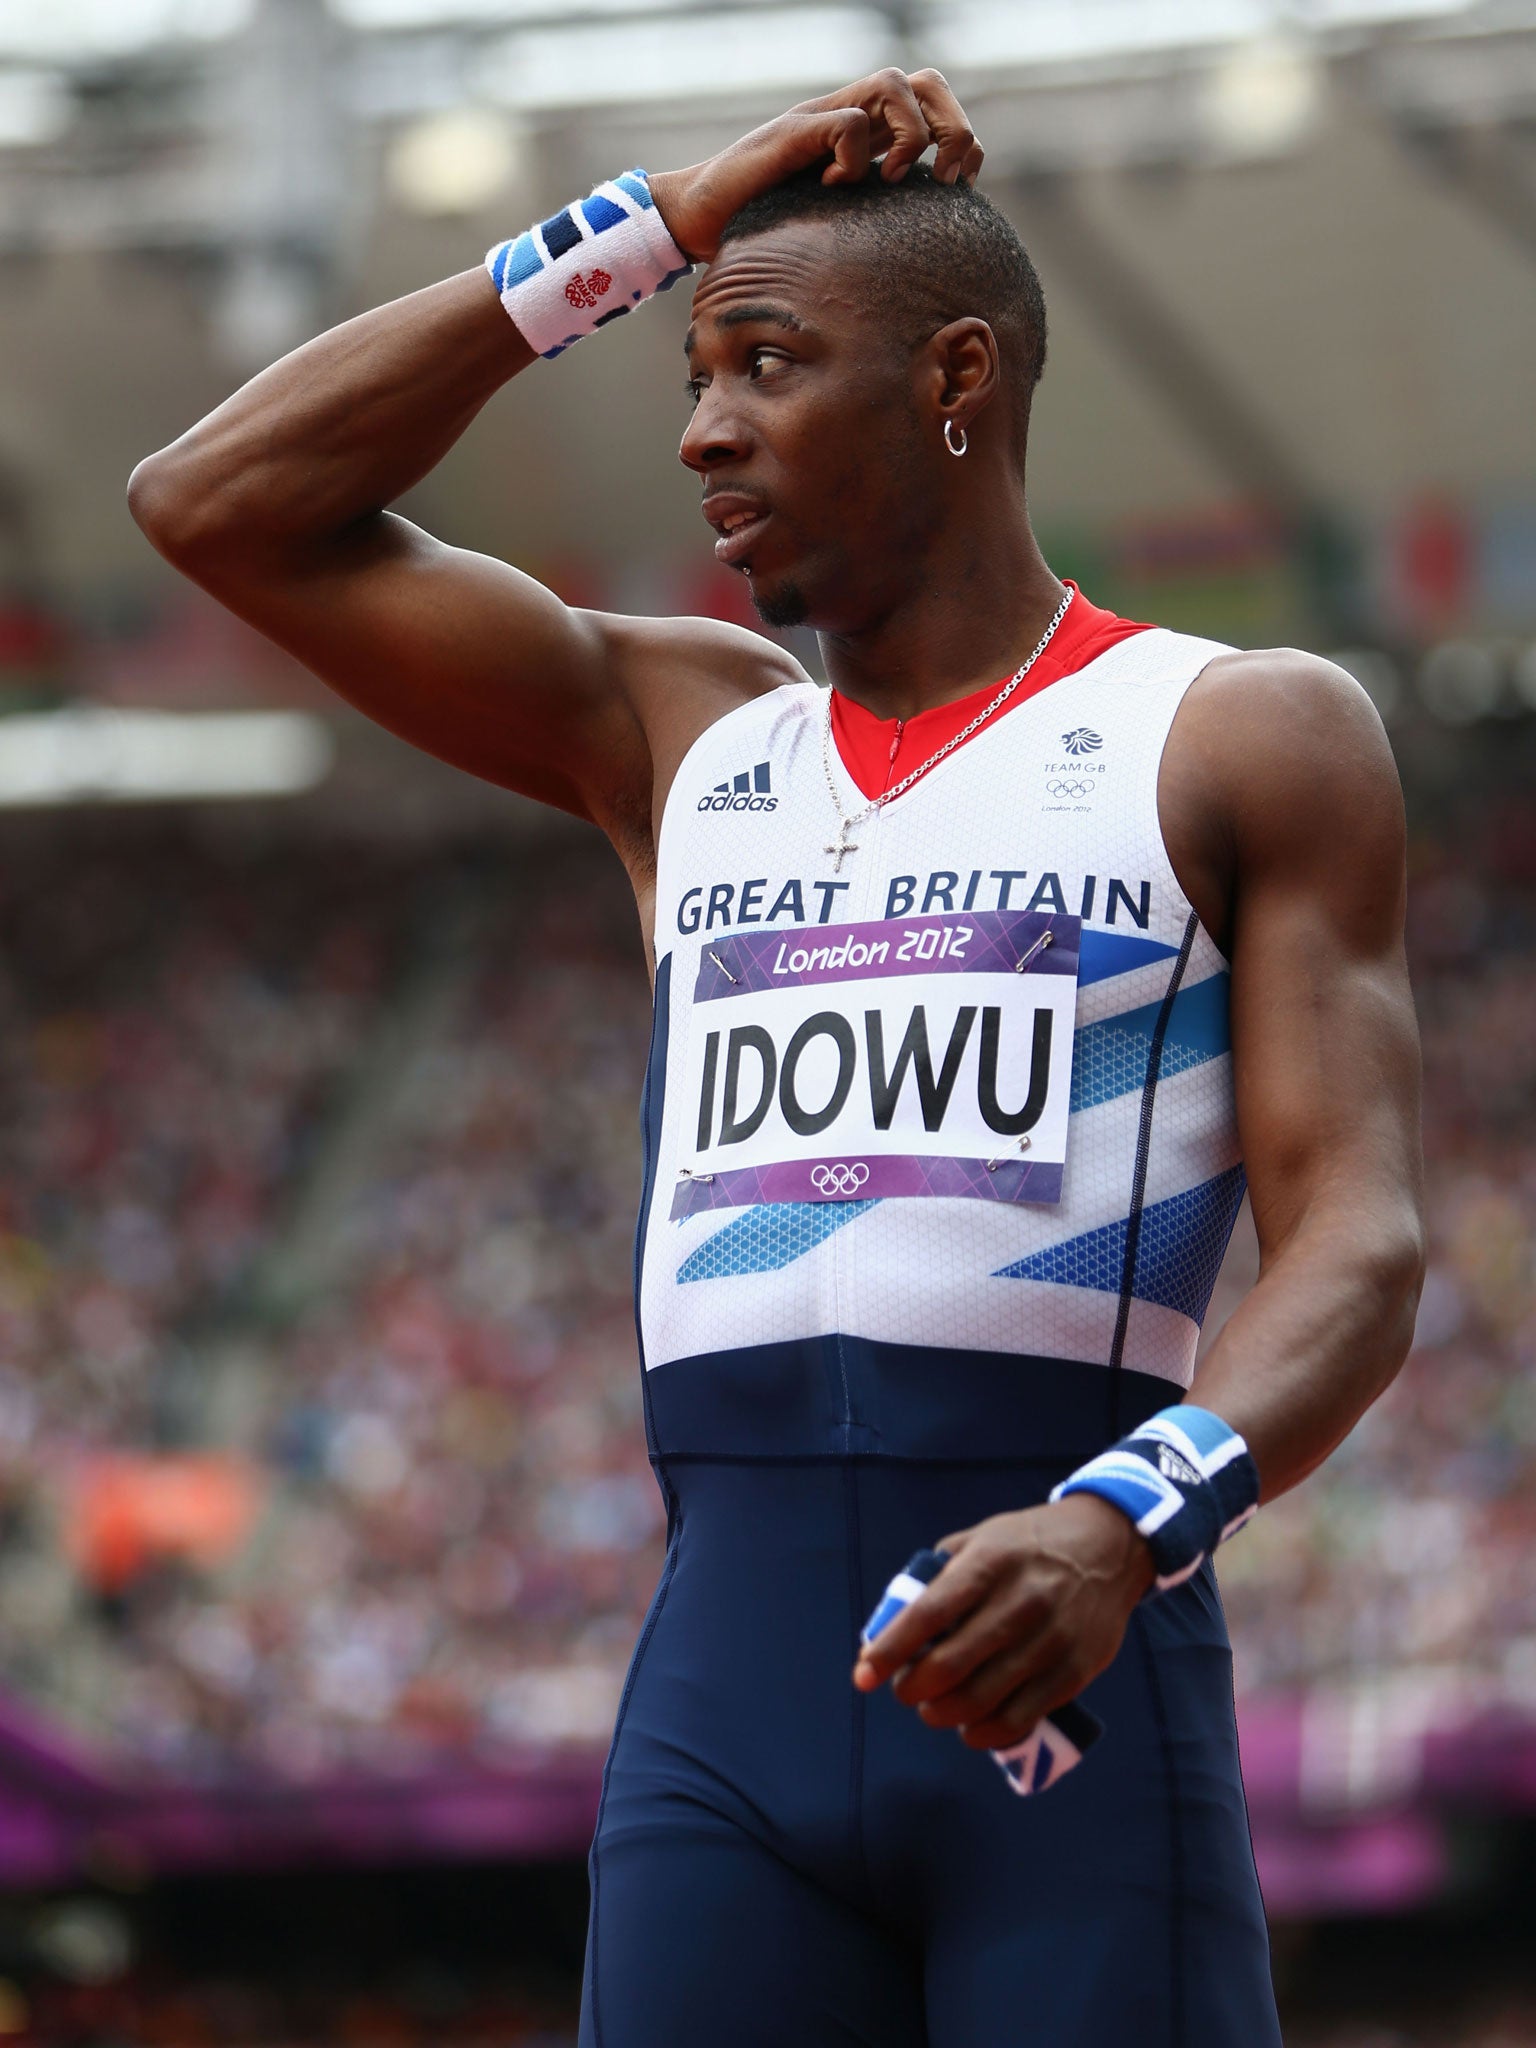 Phillips Idowu feels he let a lot of people down at the Olympics